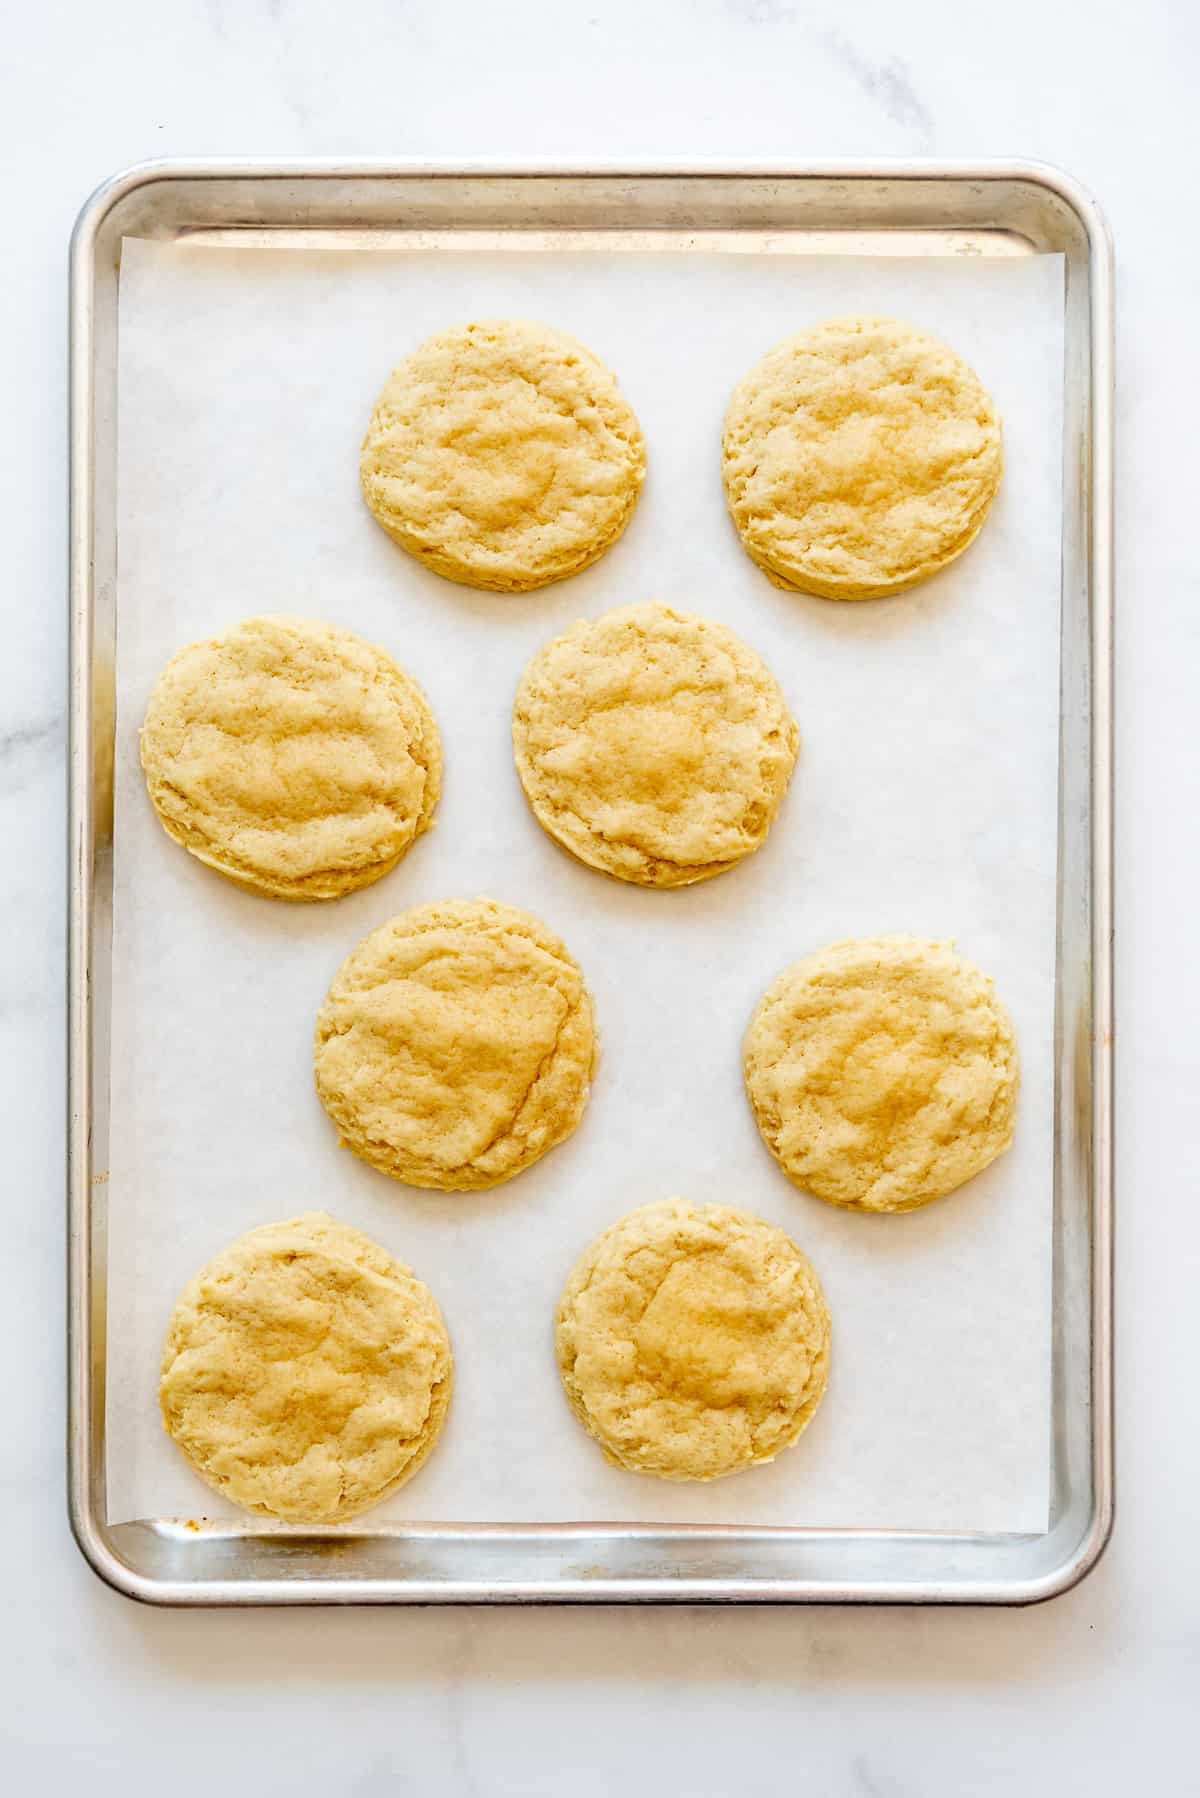 Baked cookies on a baking sheet lined with parchment paper.